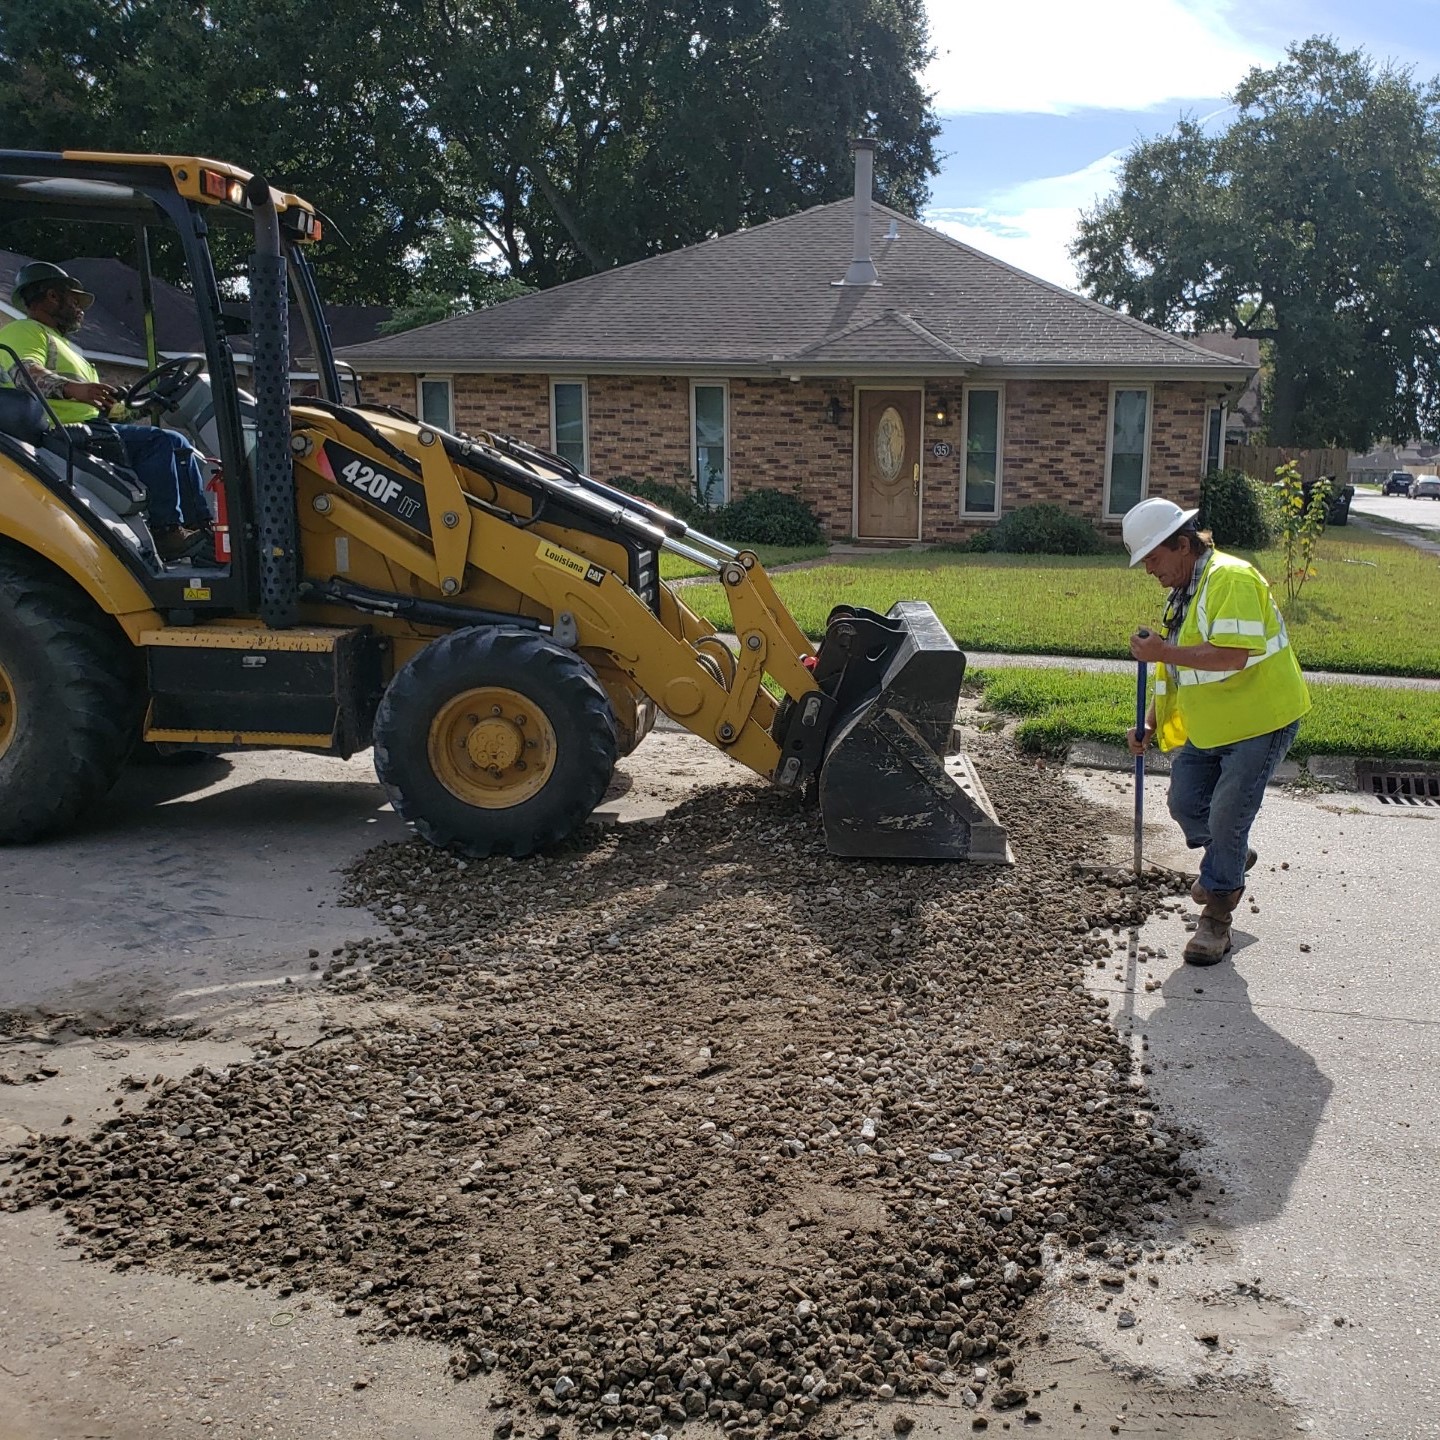 CREWS CLOSE TO COMPLETING WATER AND SEWER LINE REPLACEMENTS IN LITTLE WOODS NEIGHBORHOOD